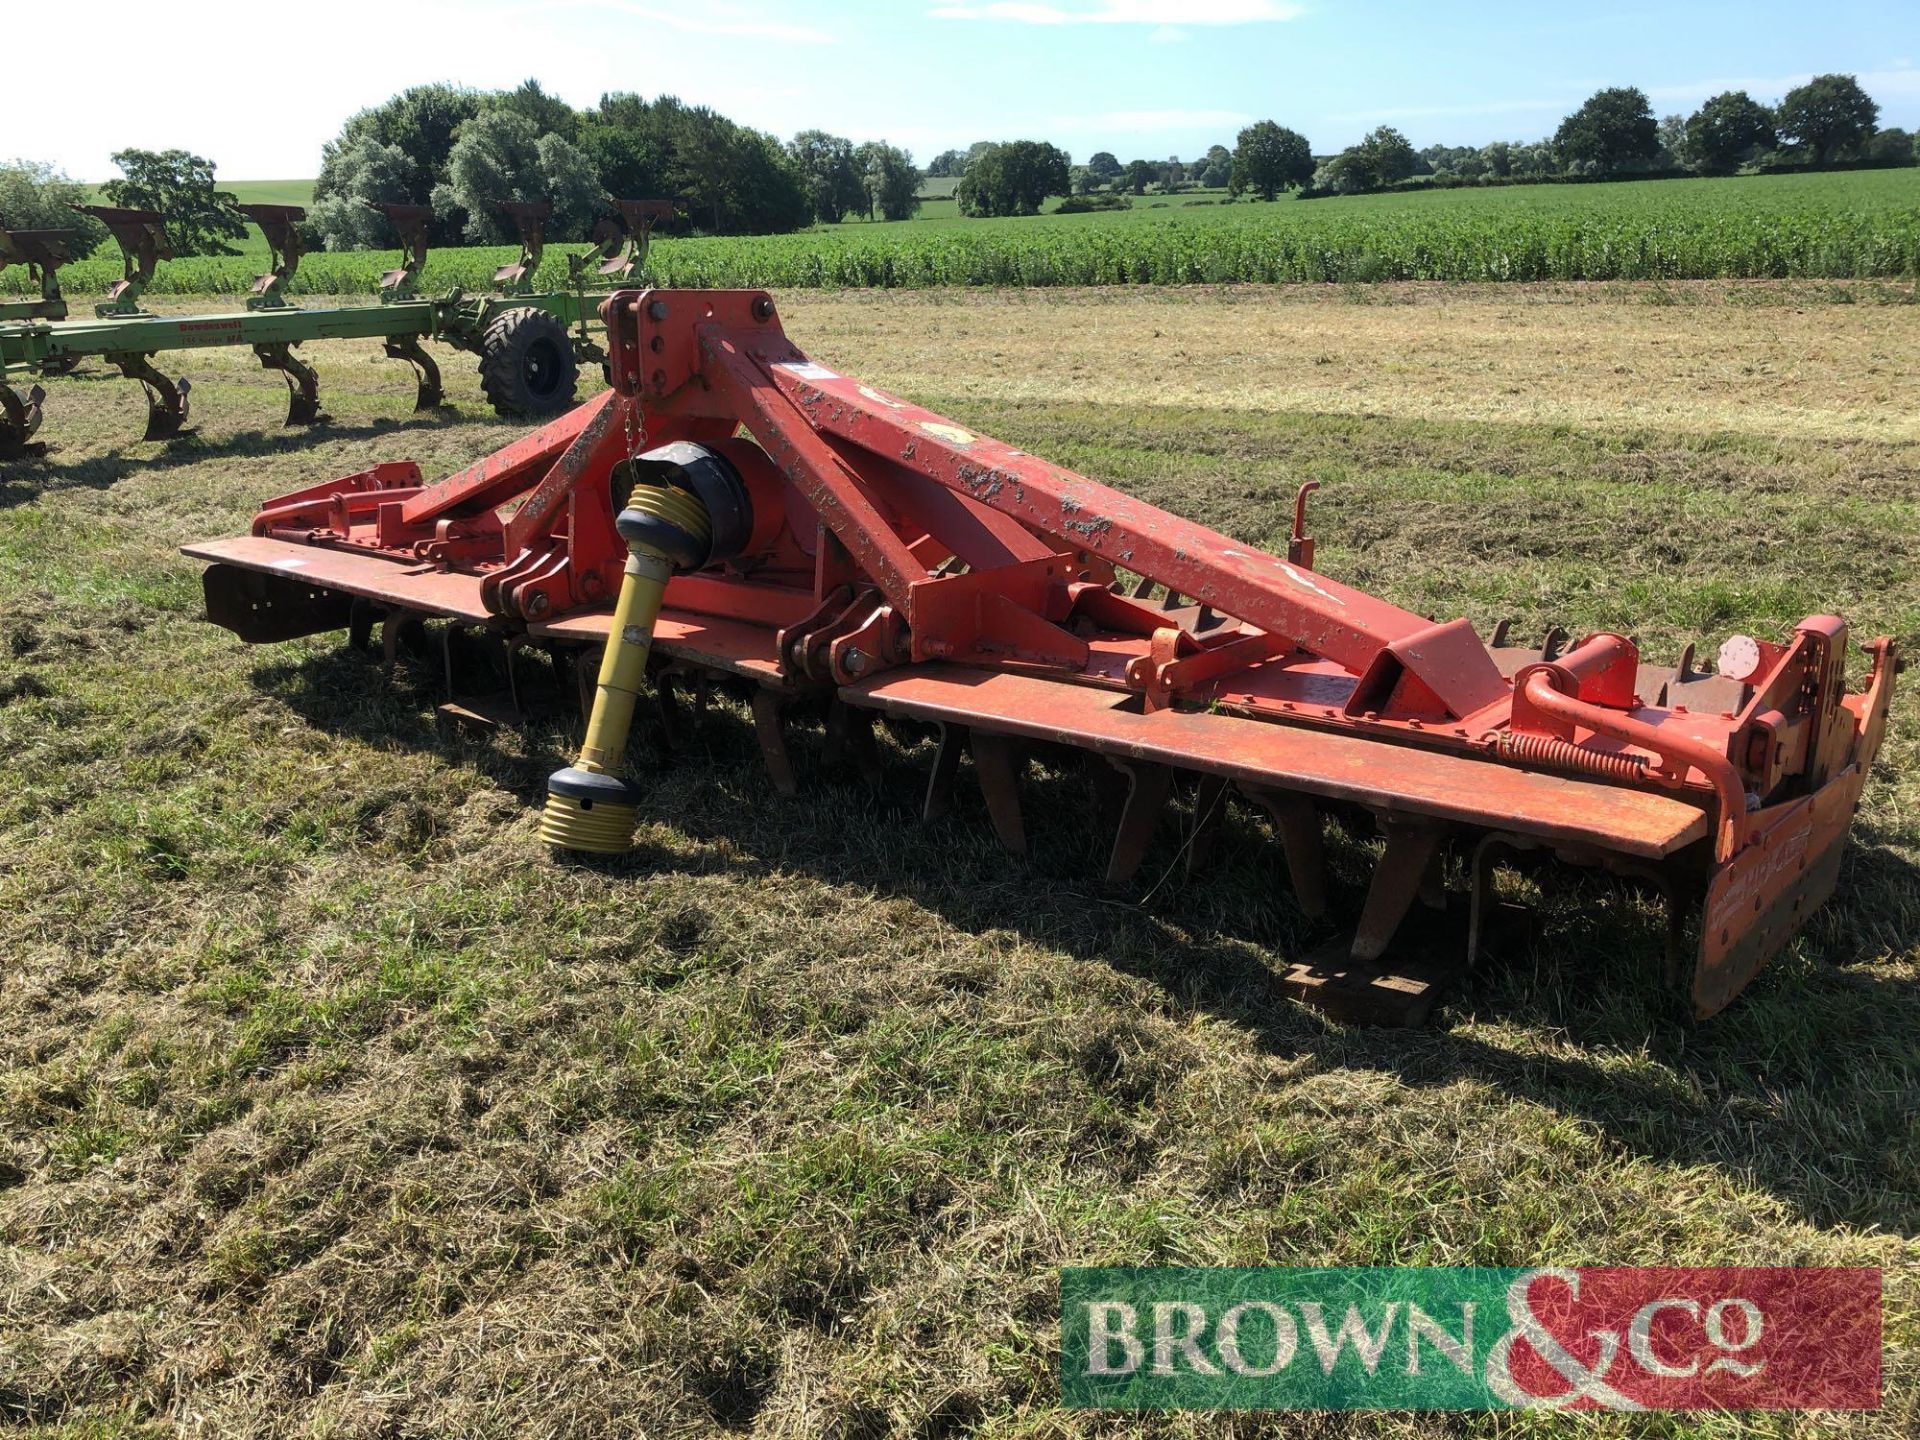 Kuhn HR4002D 4m power harrow with a packer roller. Serial No: 971460 - Image 4 of 6